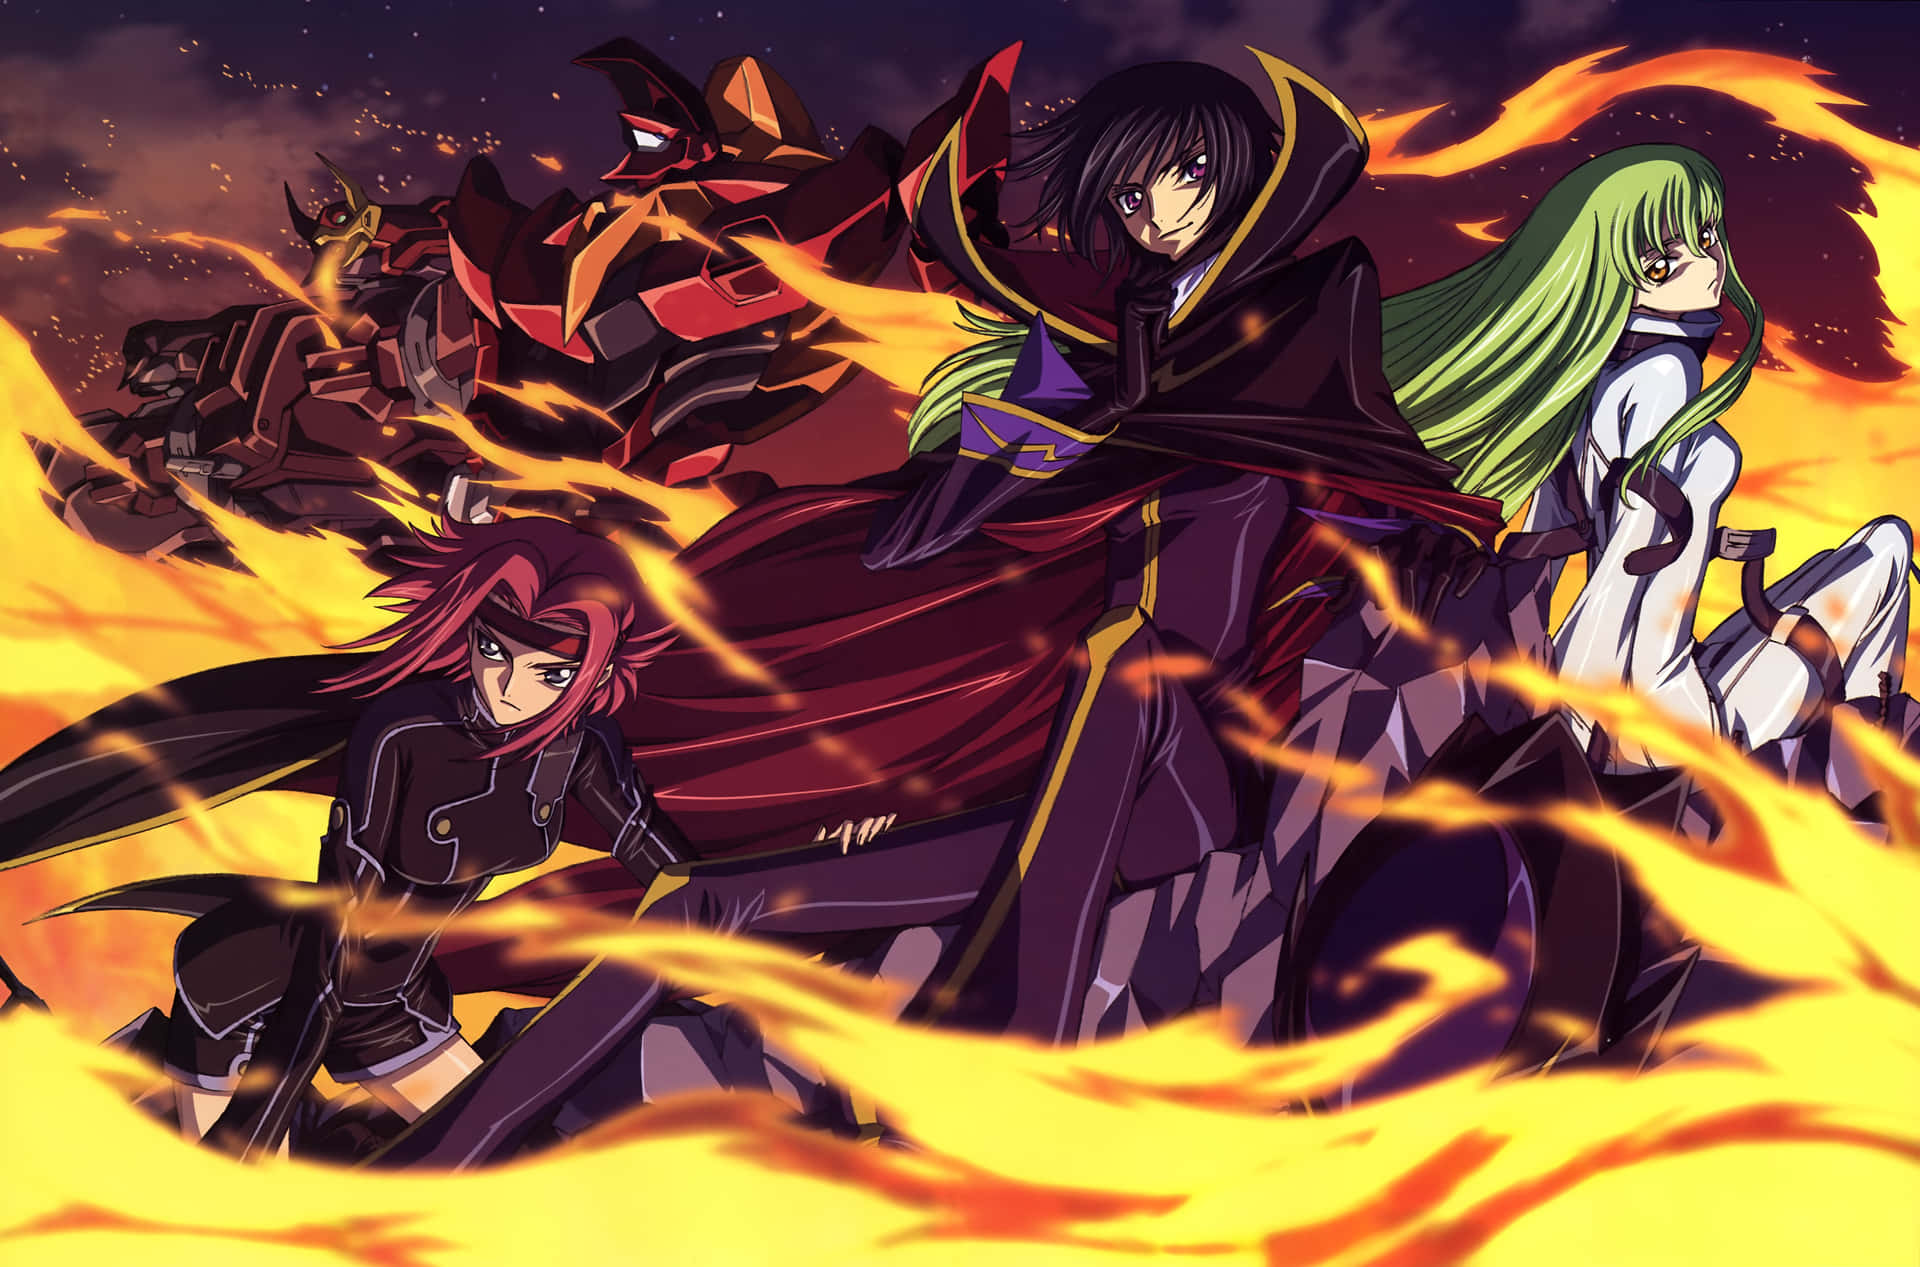 The Royal Court of Aries and Calydon at the Gates of Babylon, from Code Geass